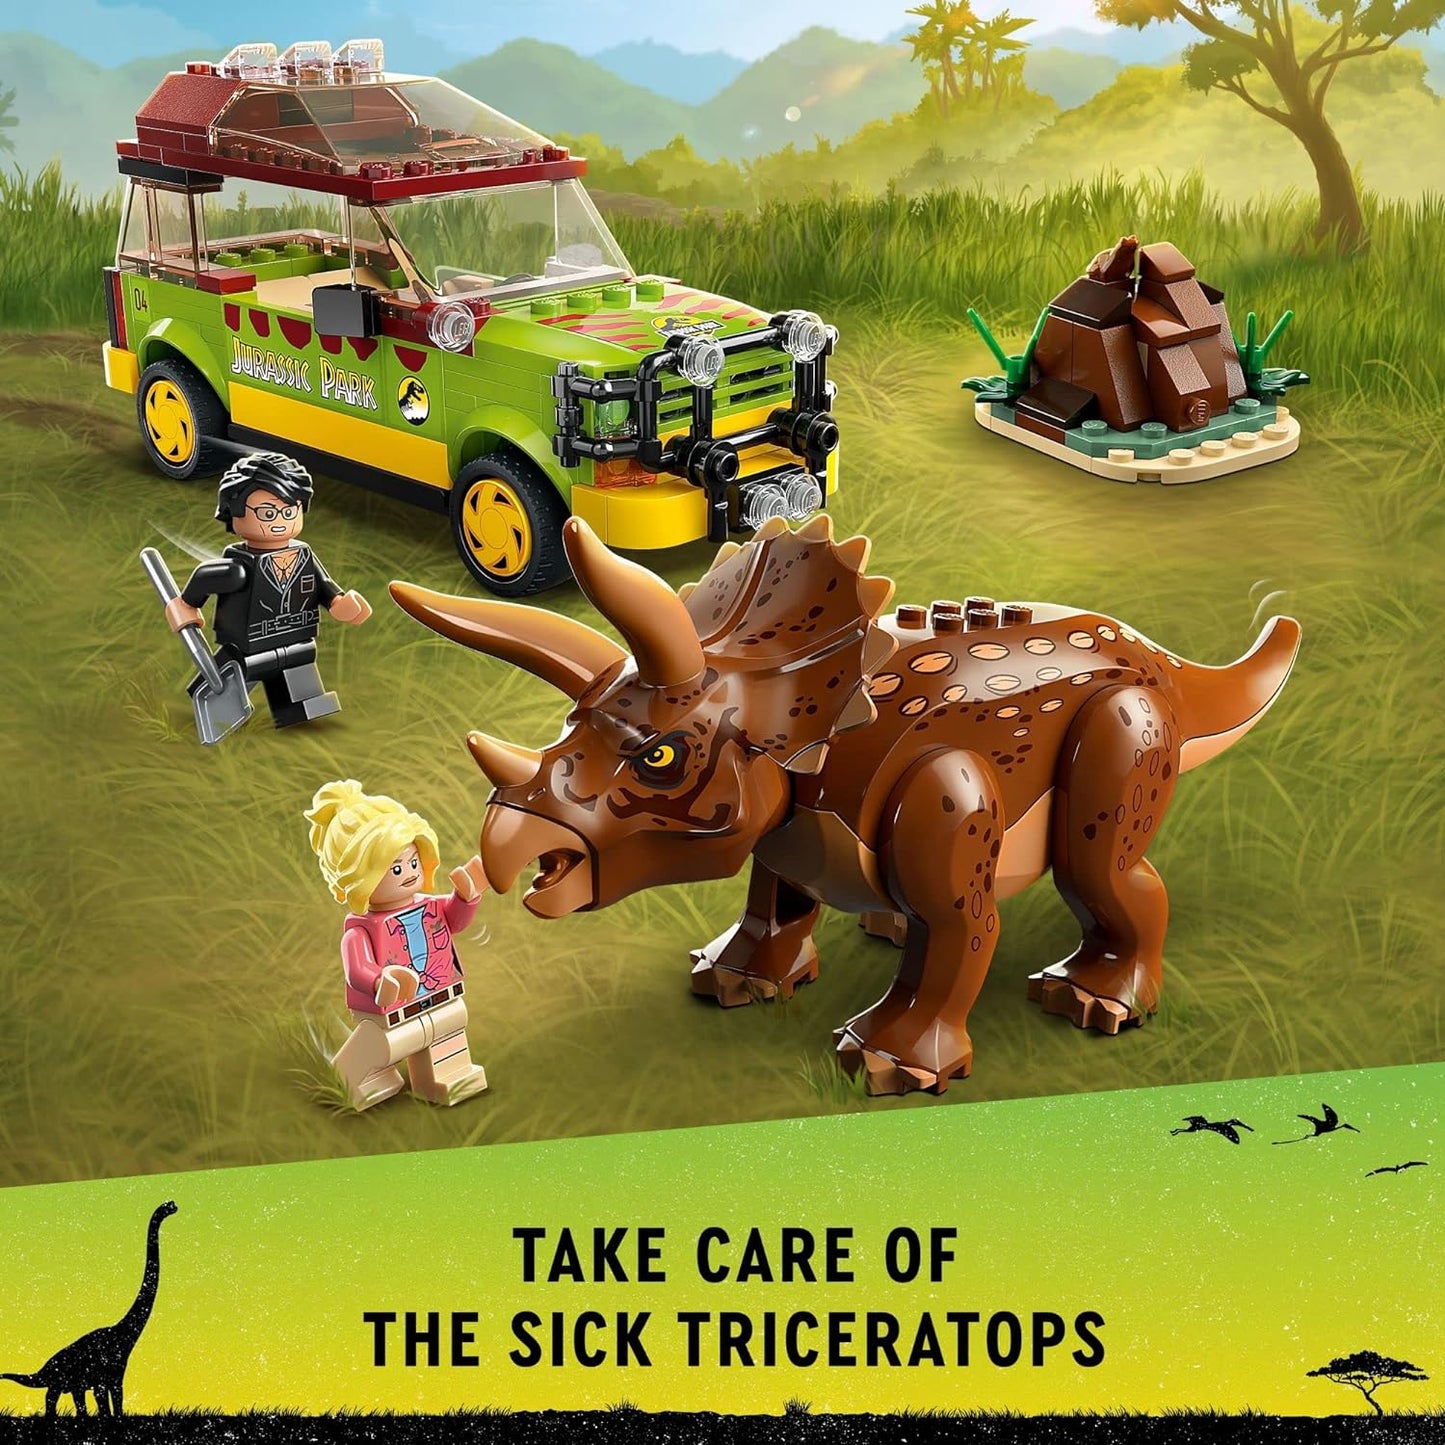 LEGO Jurassic World - Triceratops Research 76959